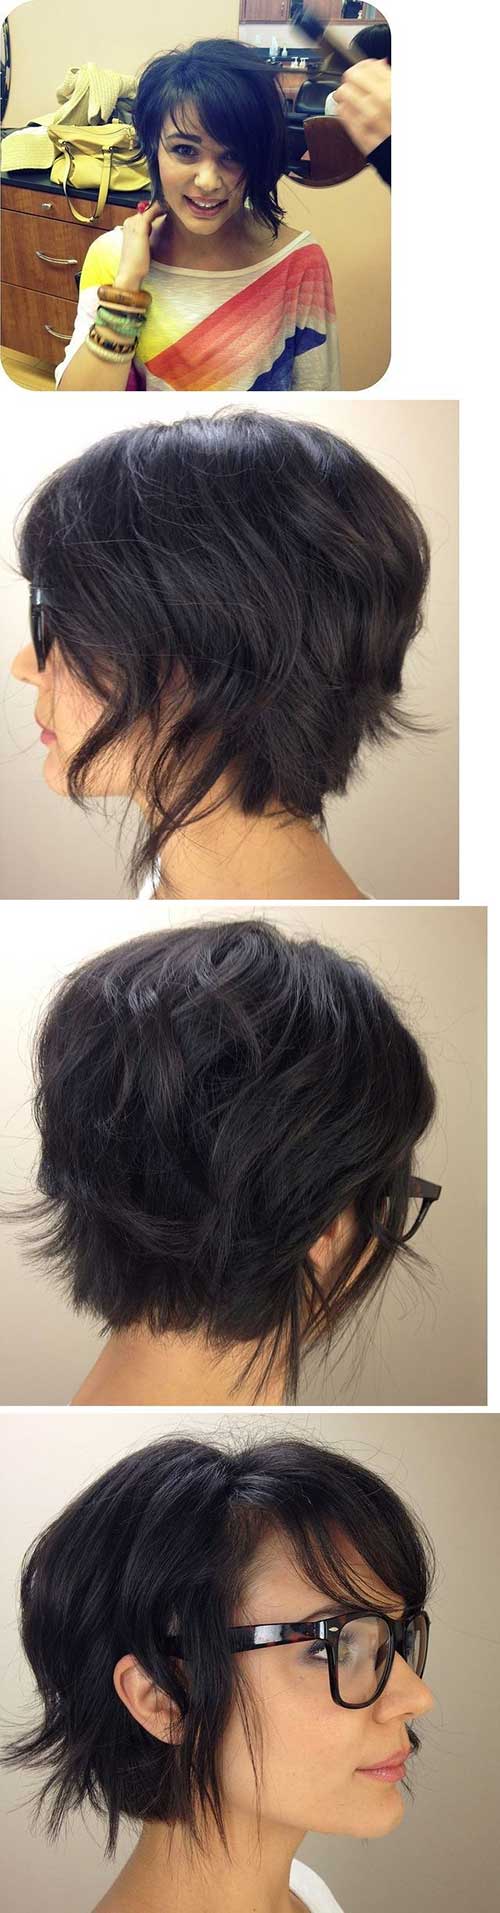 Pixie Short Hair Styles Back View Pictures